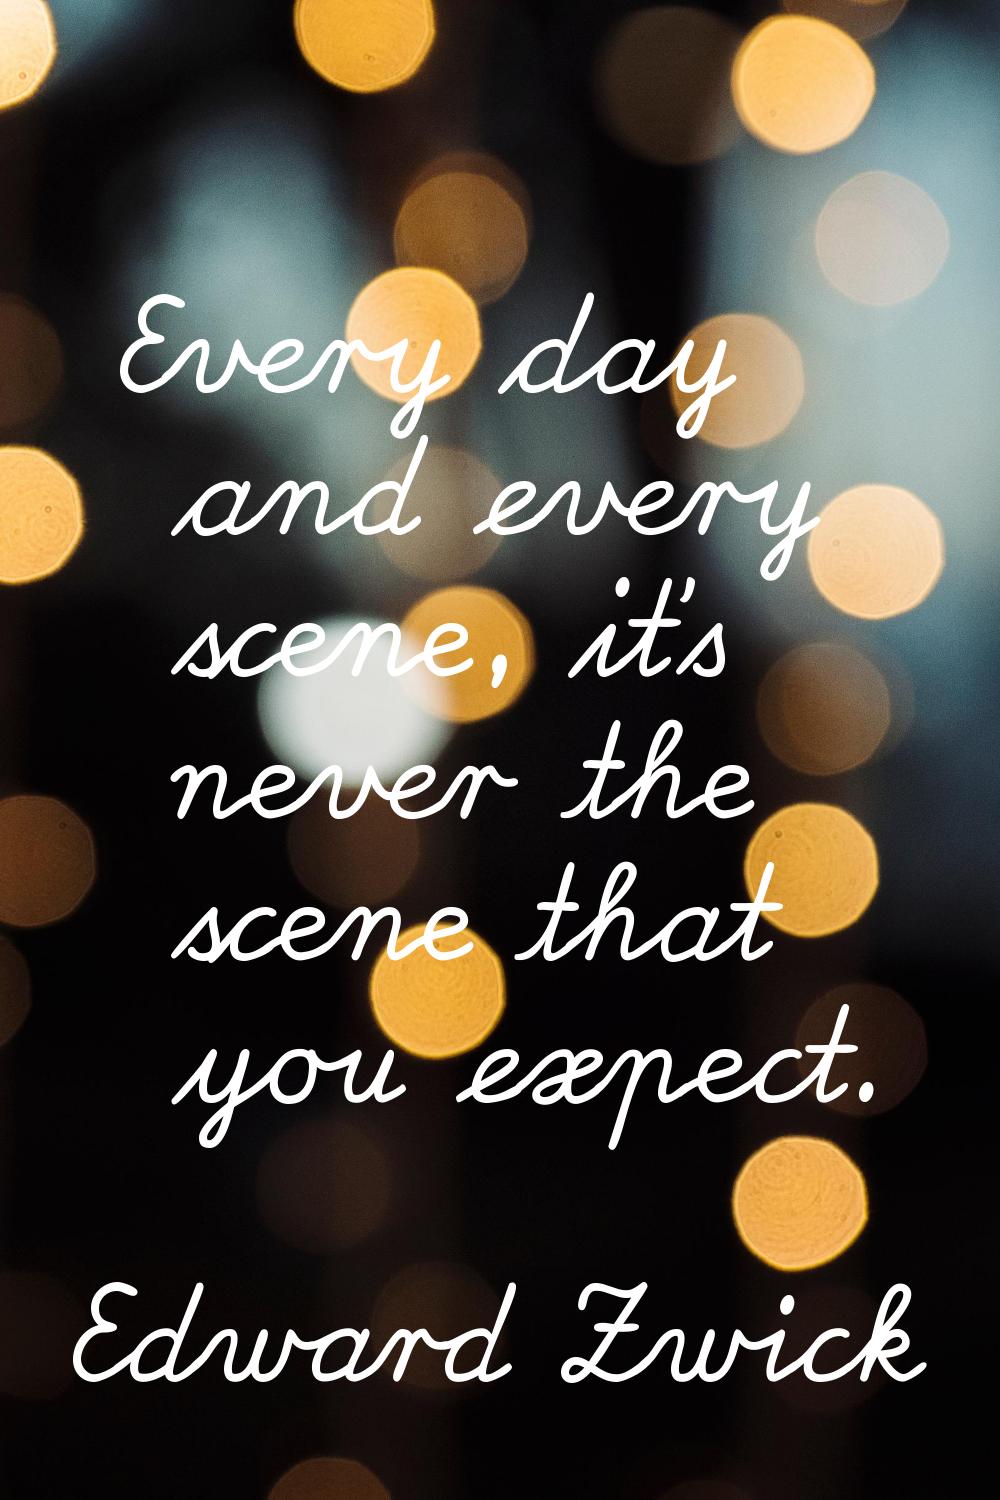 Every day and every scene, it's never the scene that you expect.